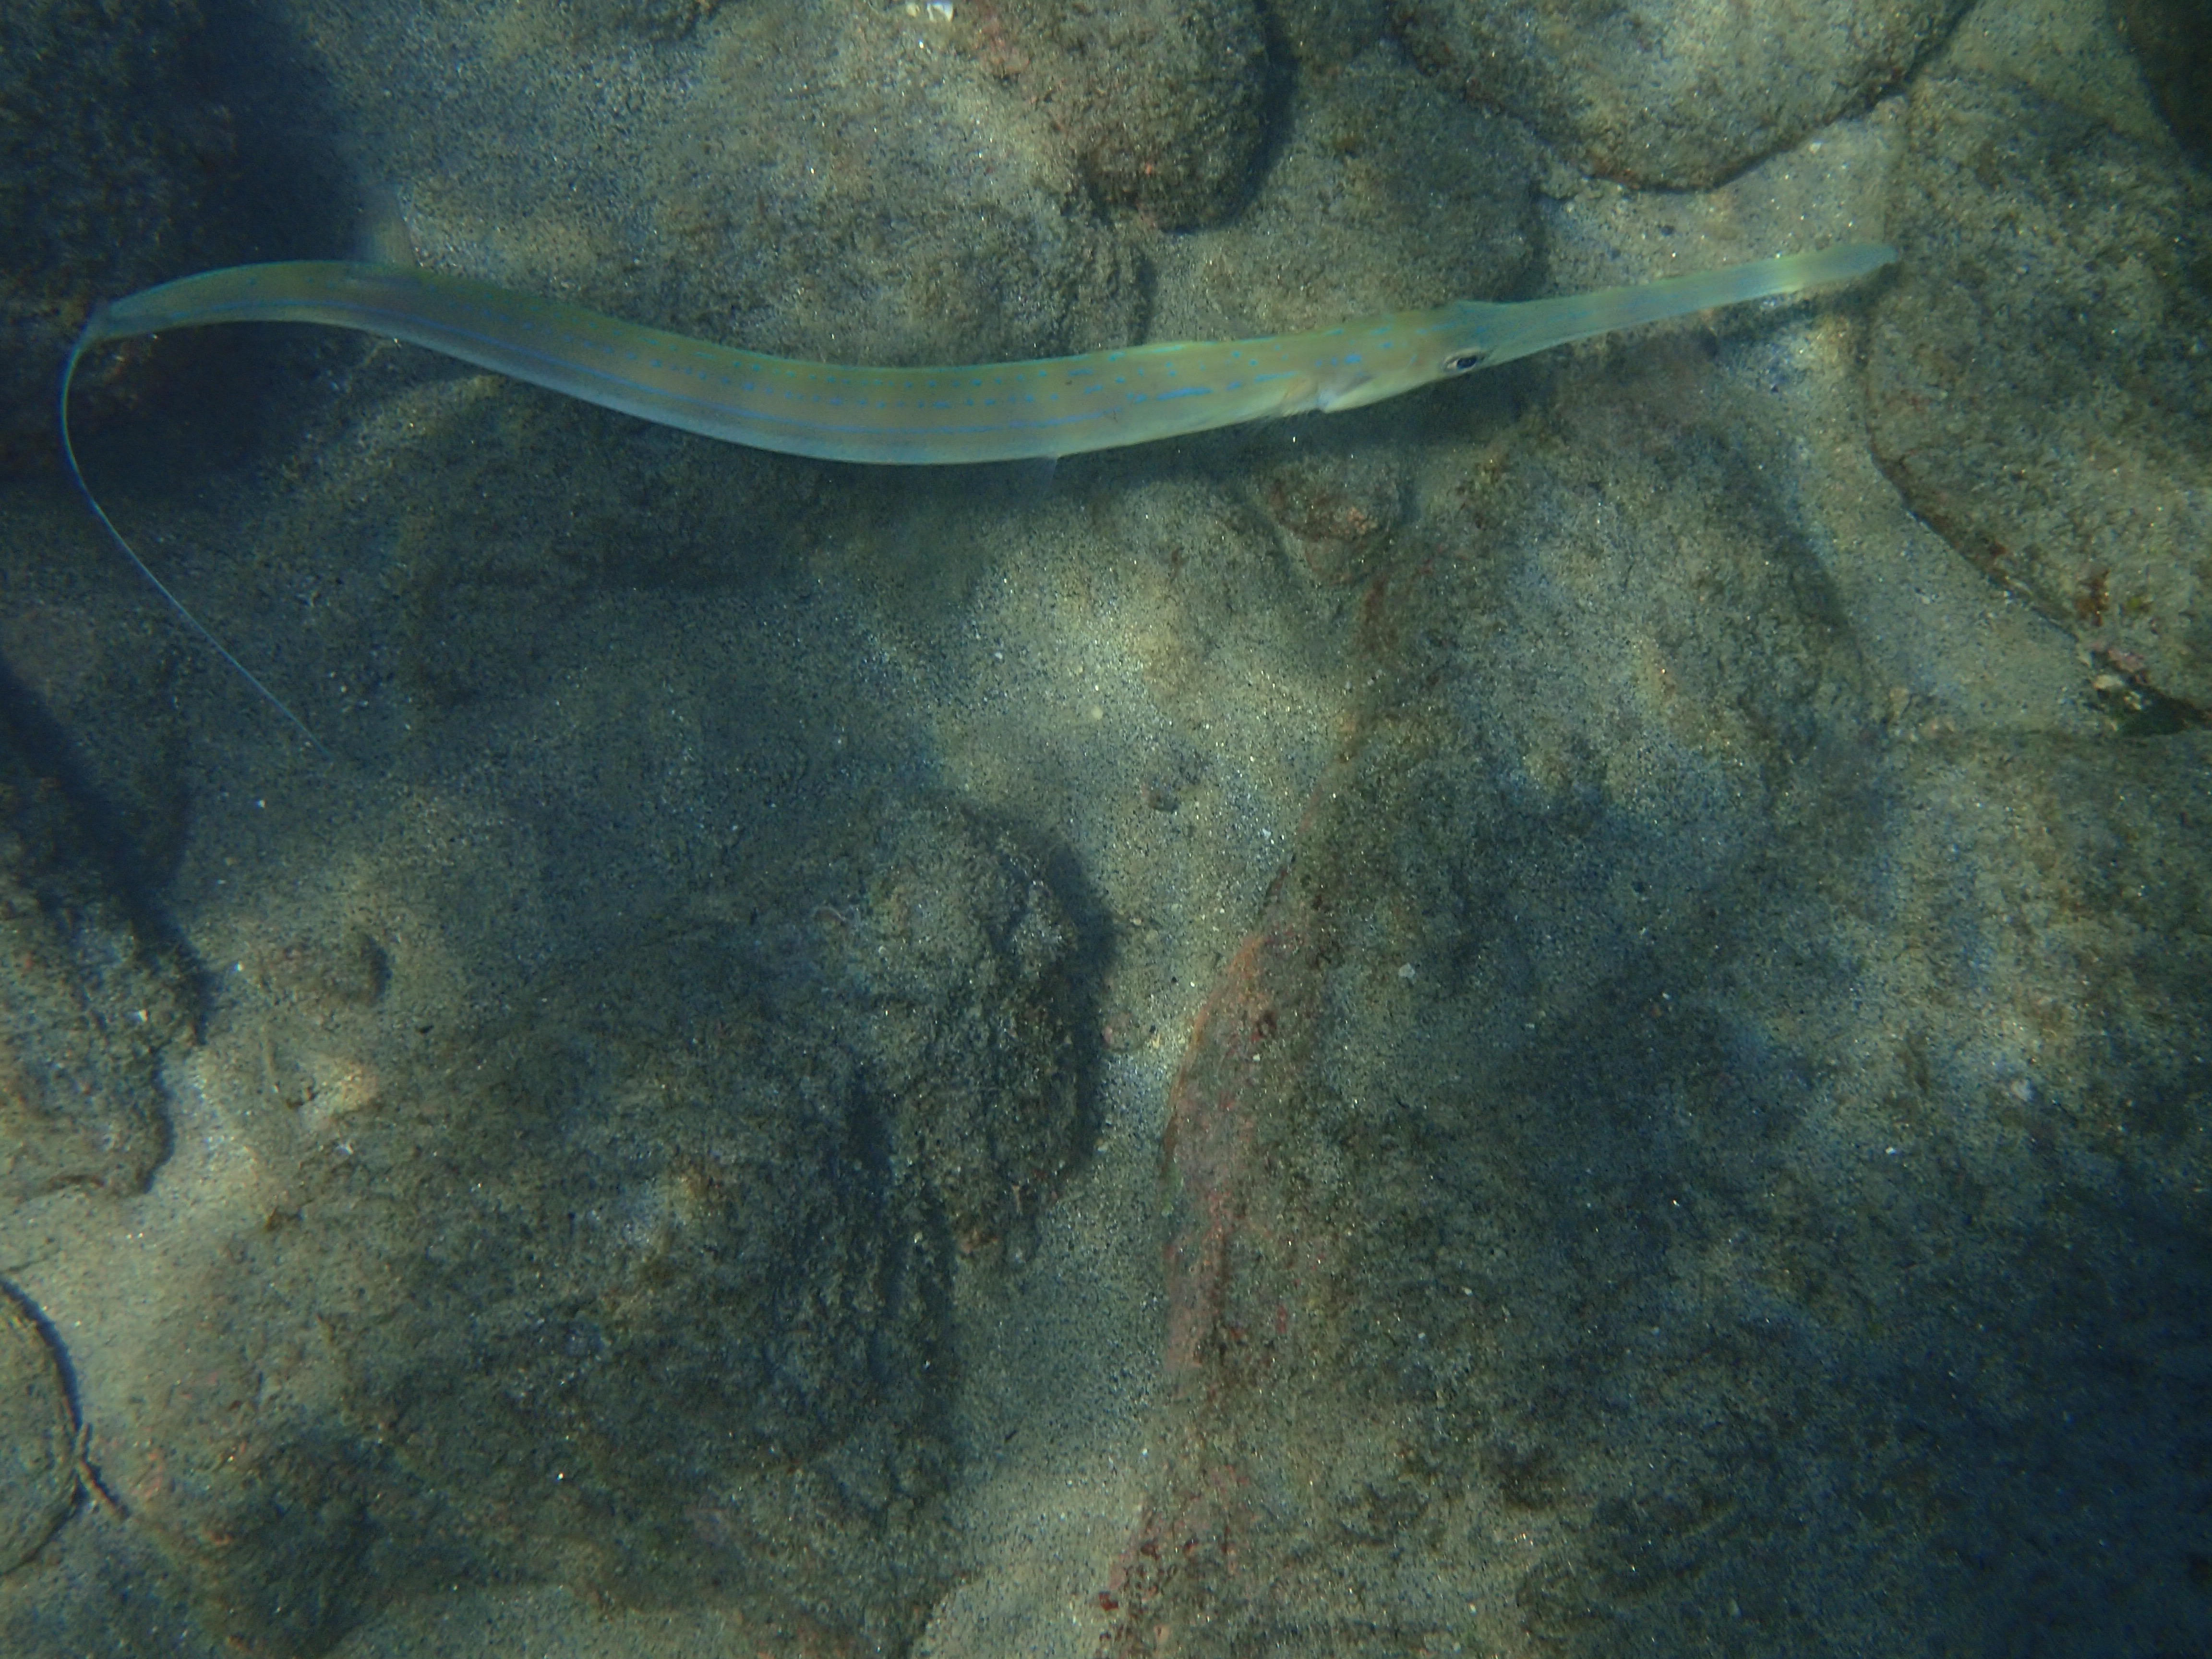 Though not very colorful, this was the most bizarre fish of all that I saw.